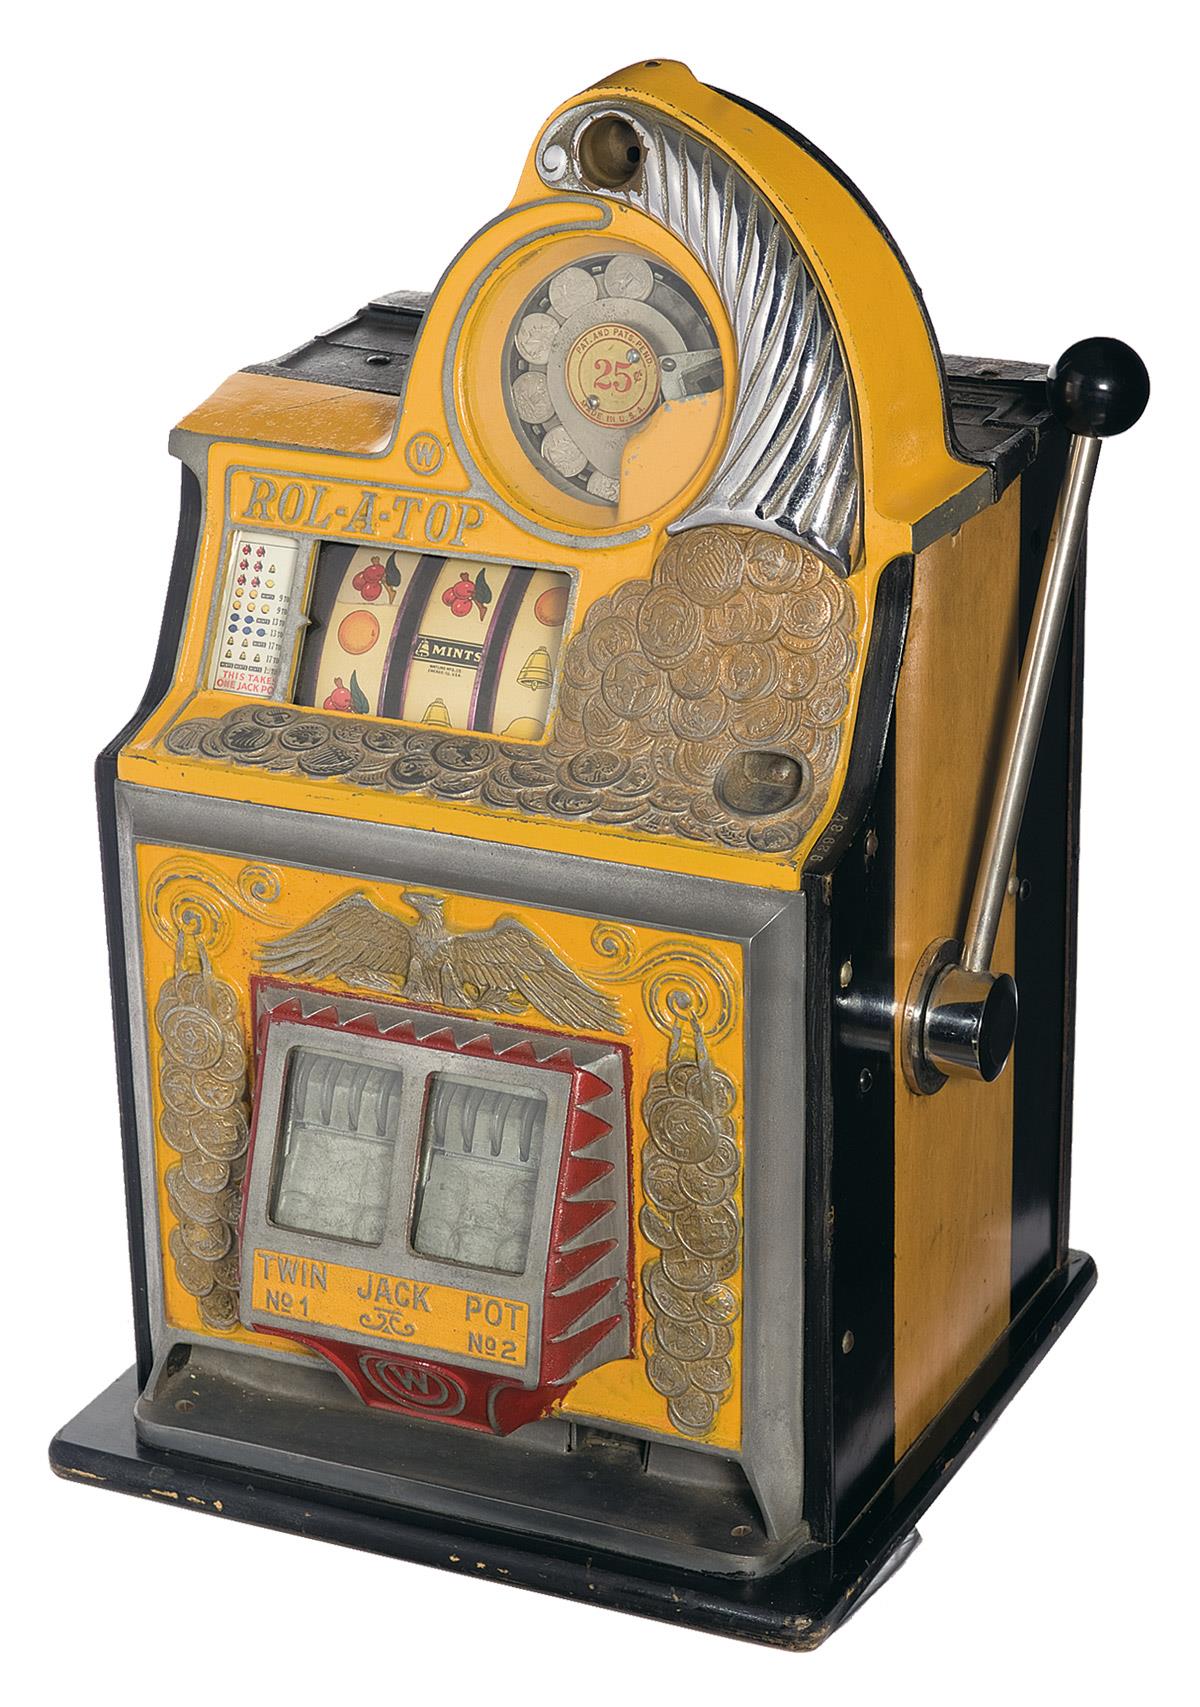 25¢ Watling Rol A Top Coin Front Slot Machine.